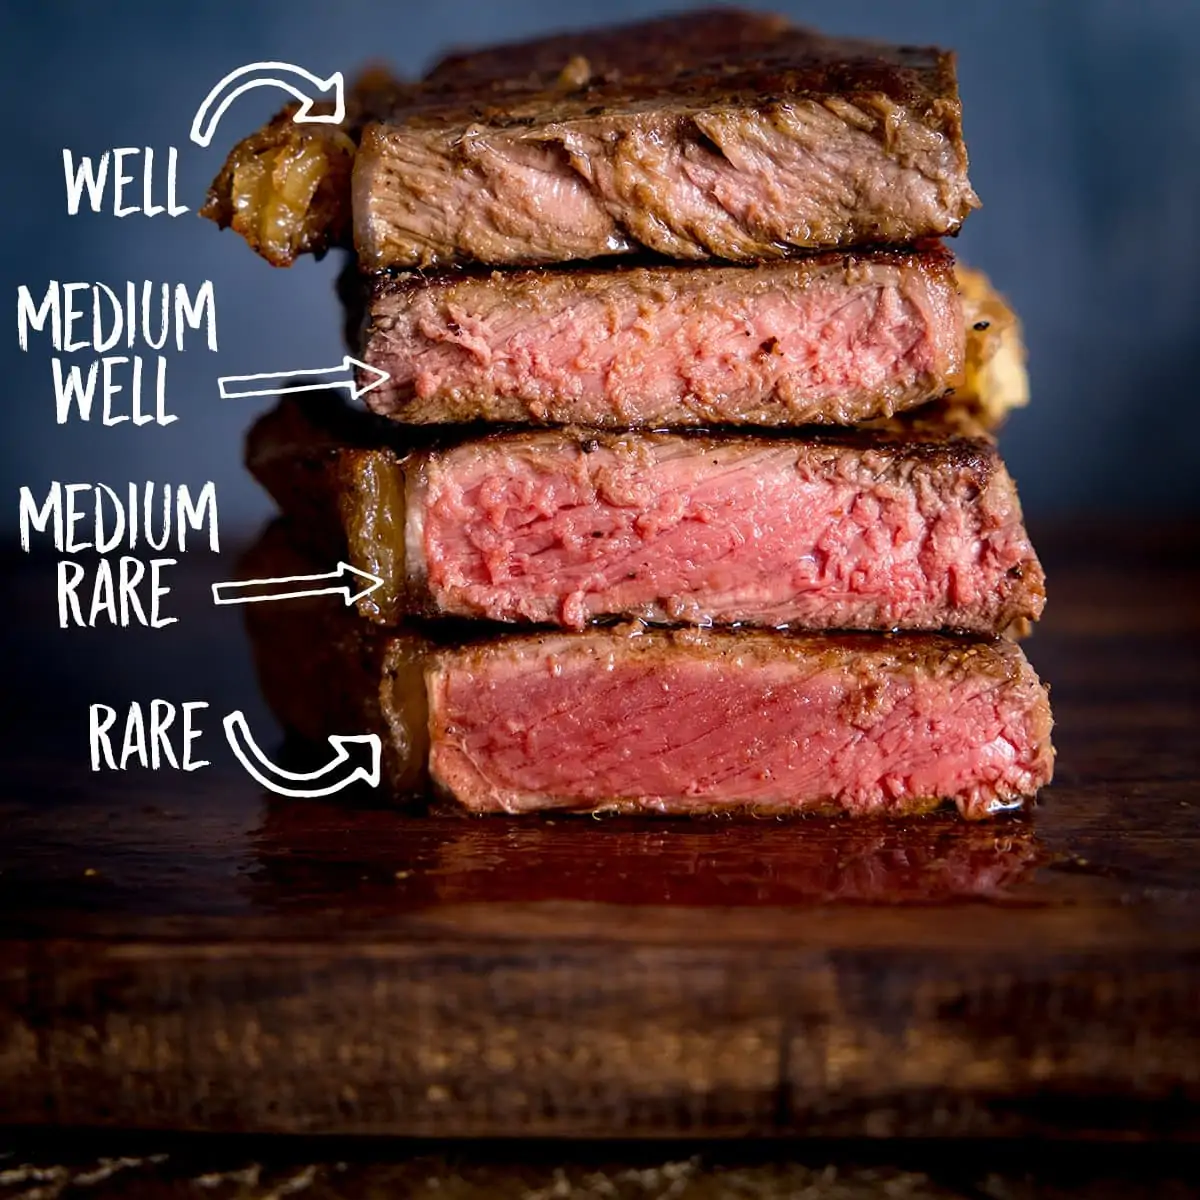 Degree of Doneness  Rare, Medium Rare, or Well Steak, its in the cooking  temp.